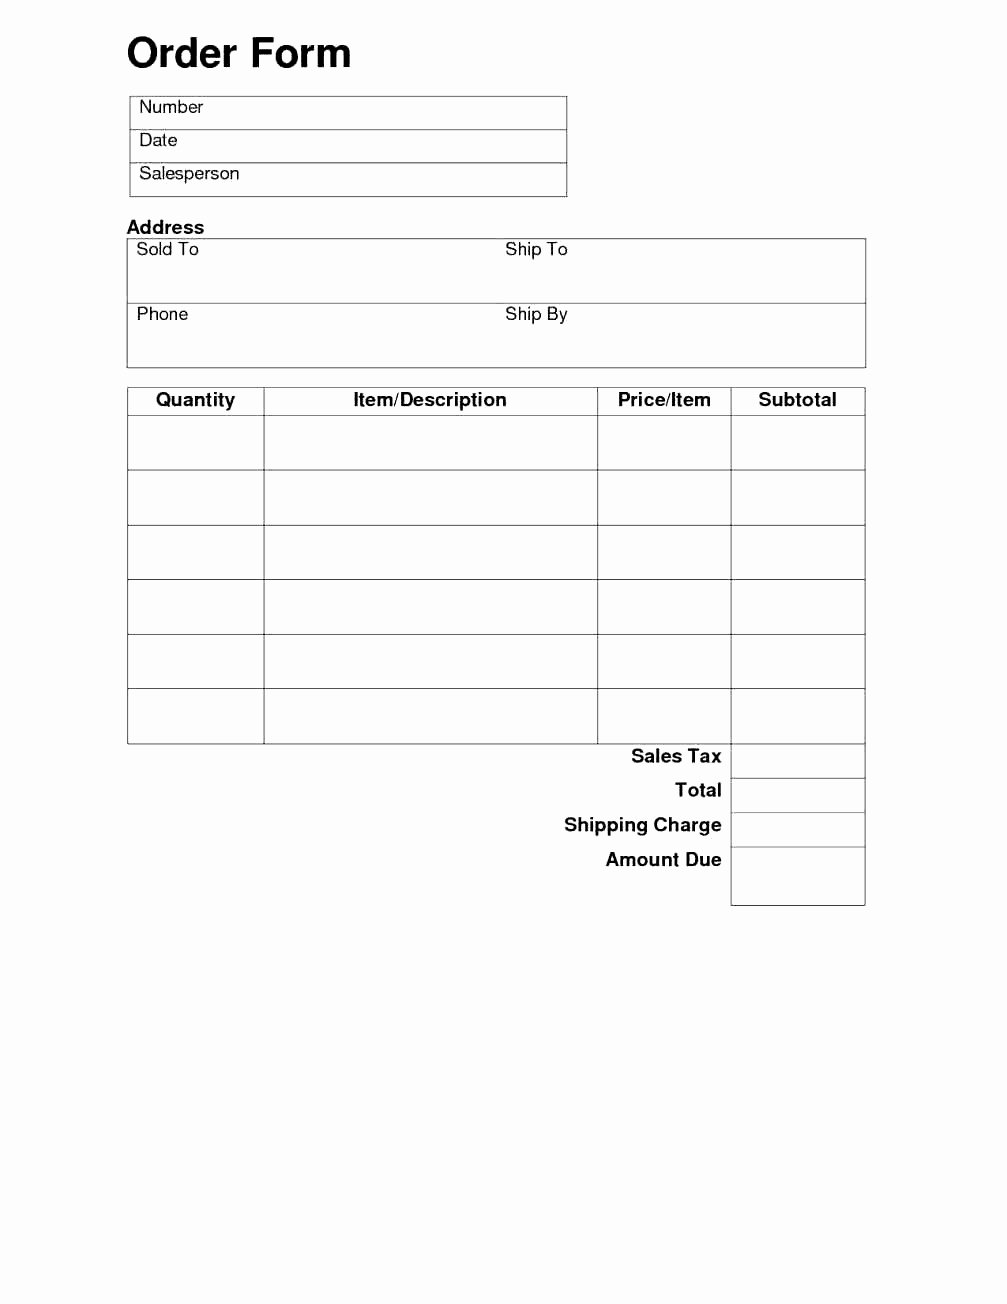 Physician orders form Template Fresh Physician order form Template – Versatolelive